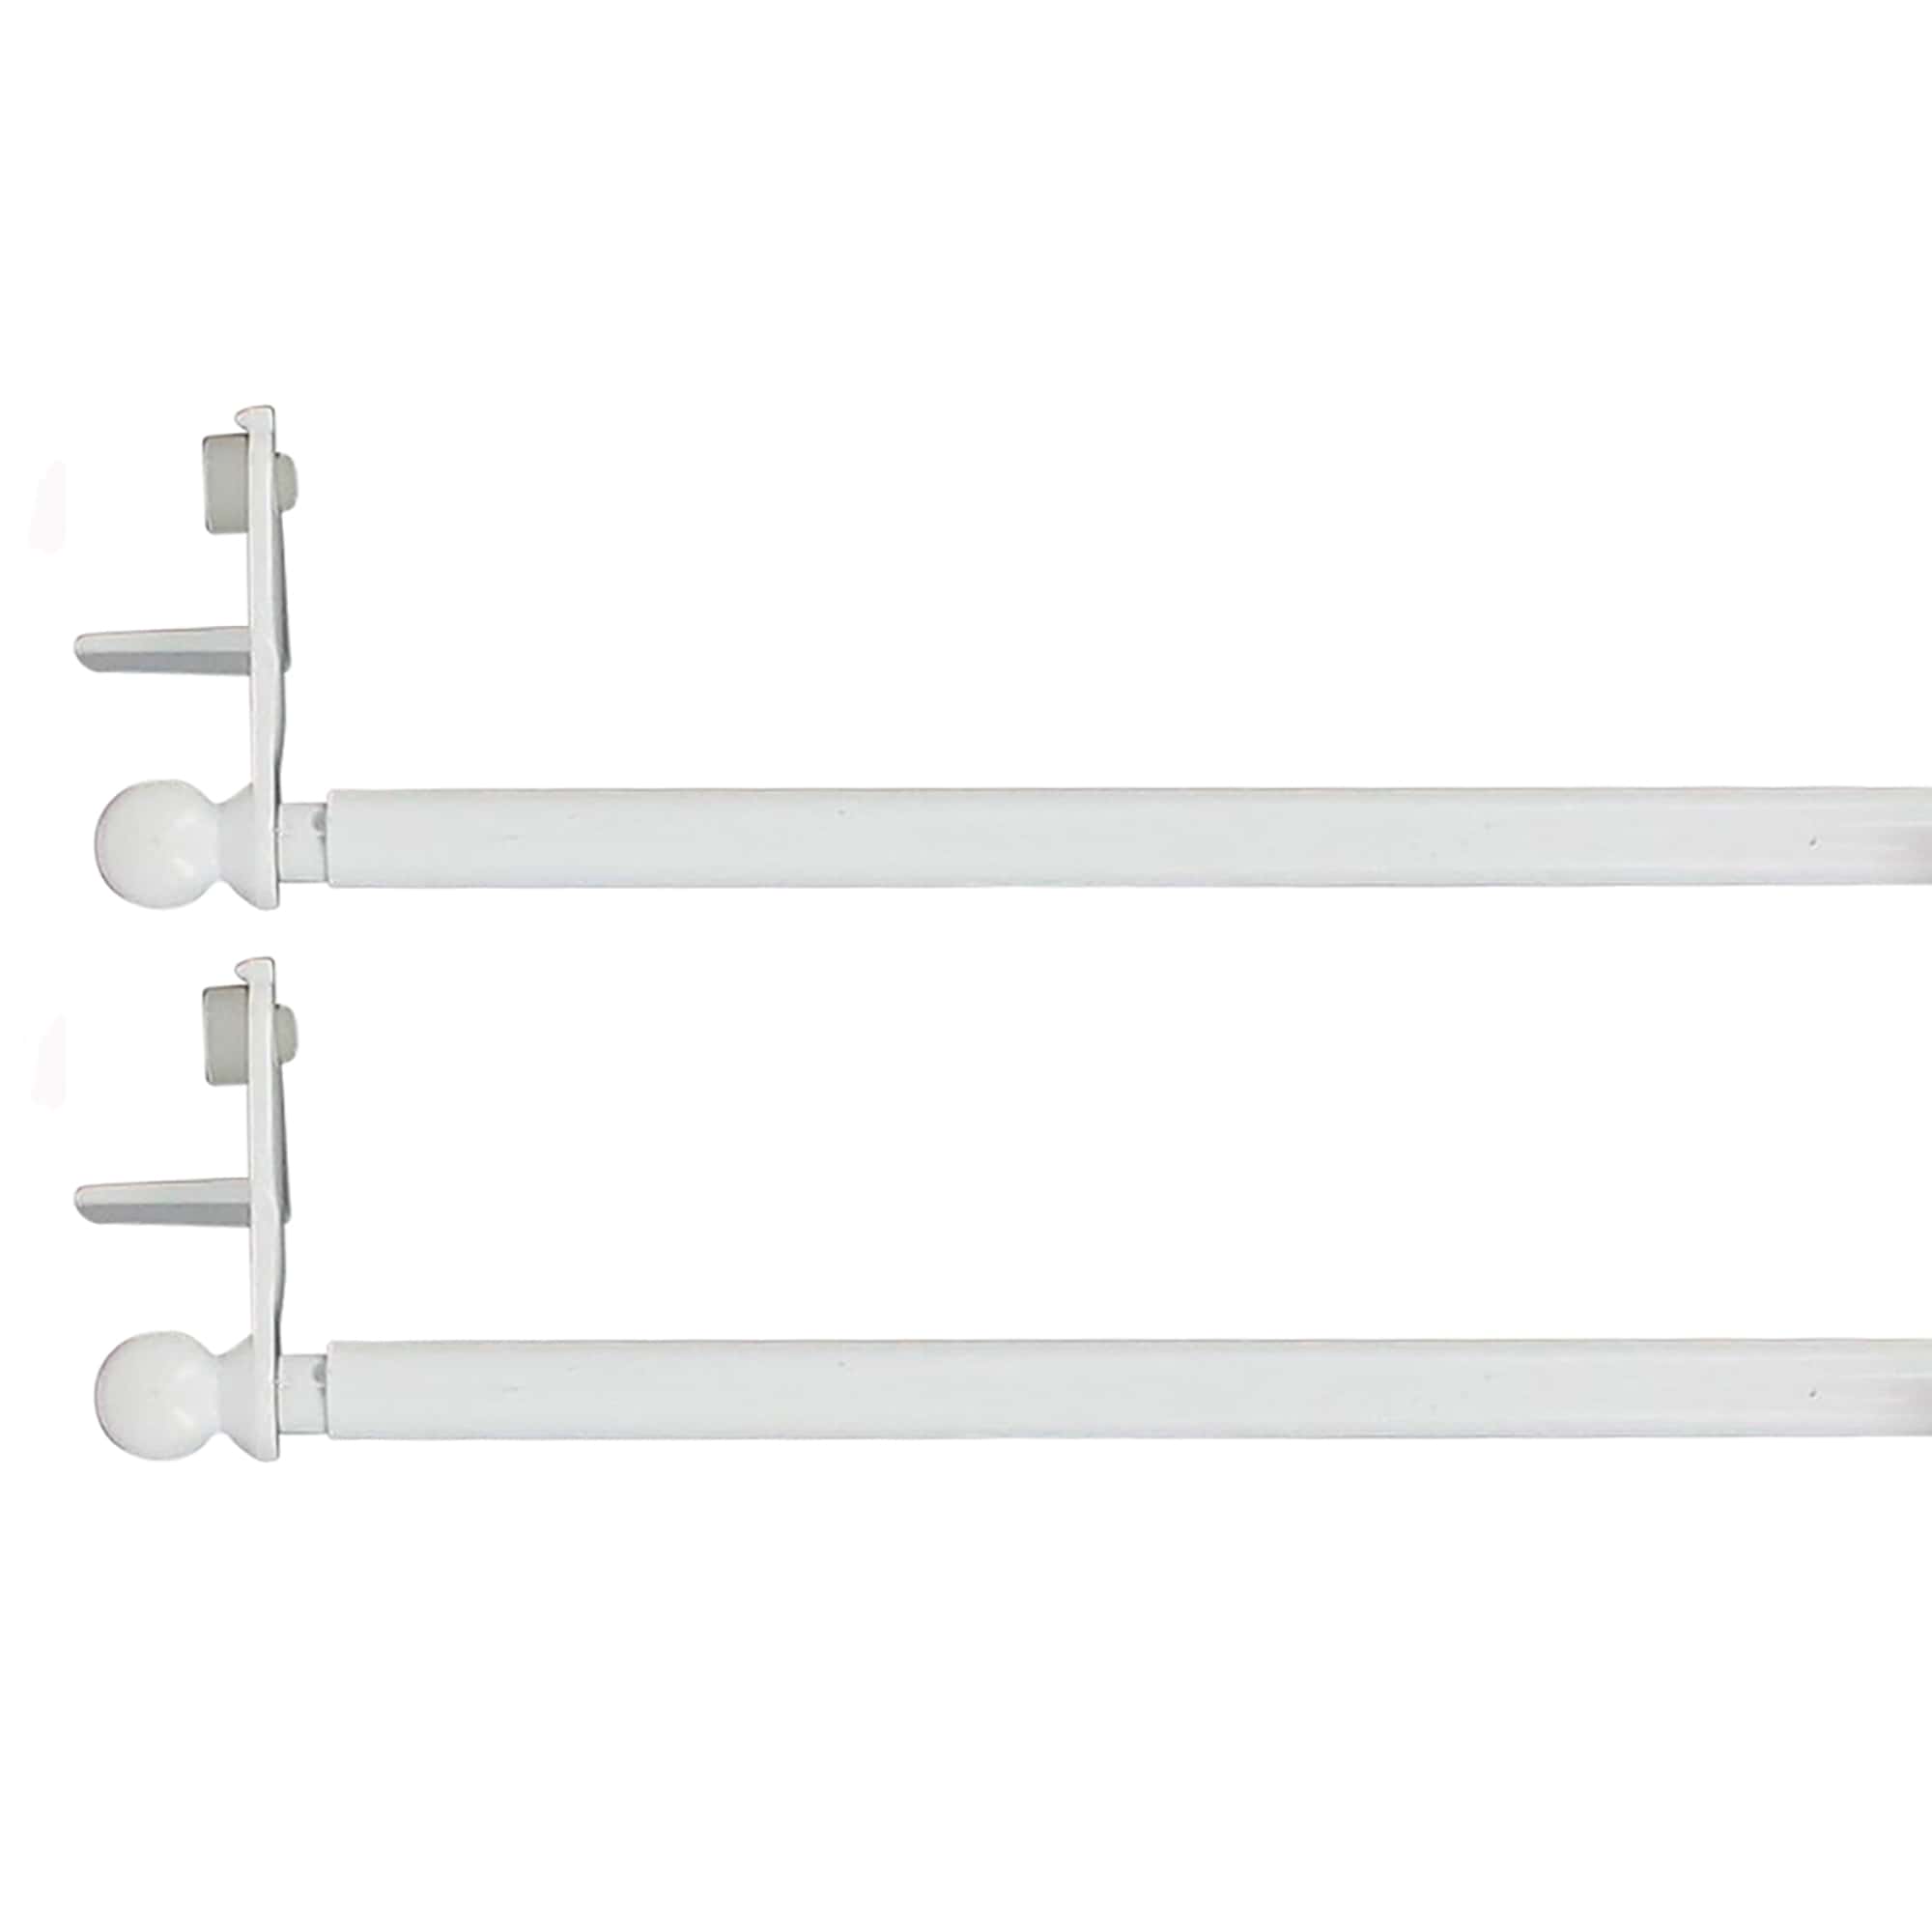 Set of 2 White Adjustable Tension Rods 31"